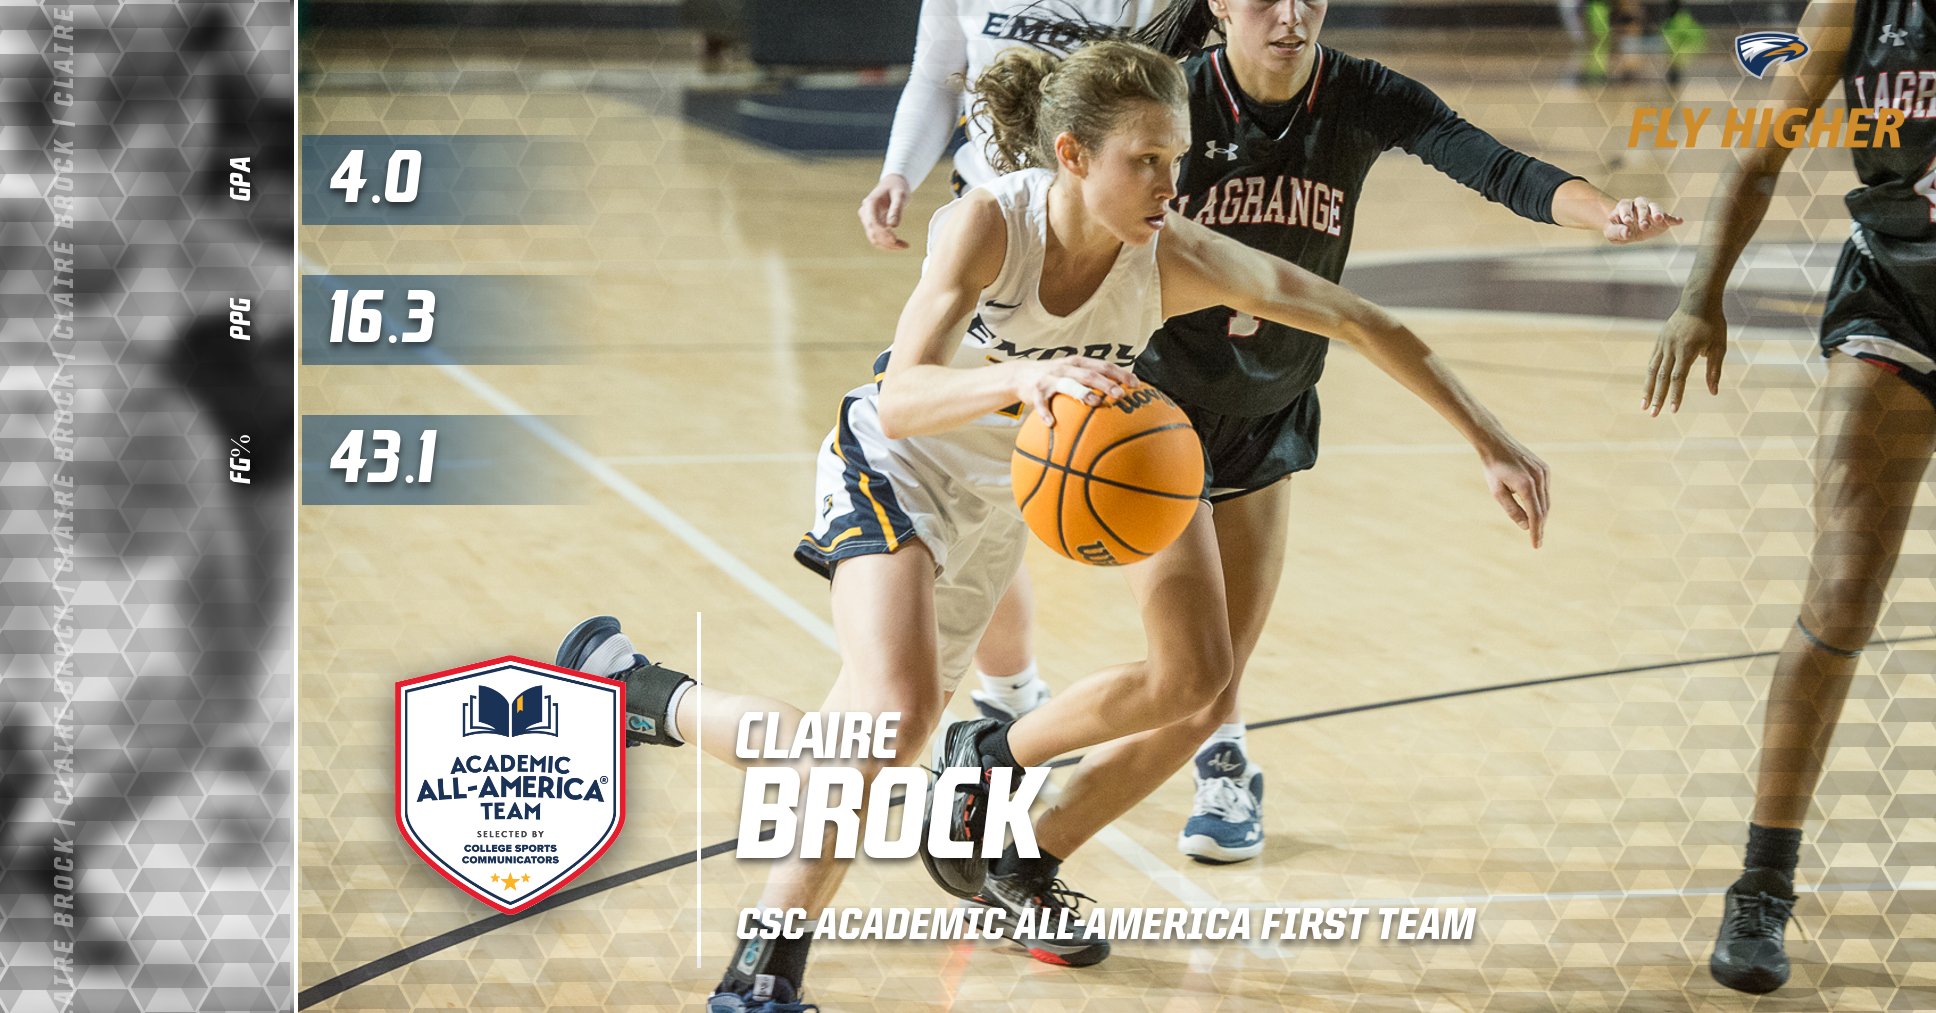 Claire Brock Named to CSC Academic All-America First Team